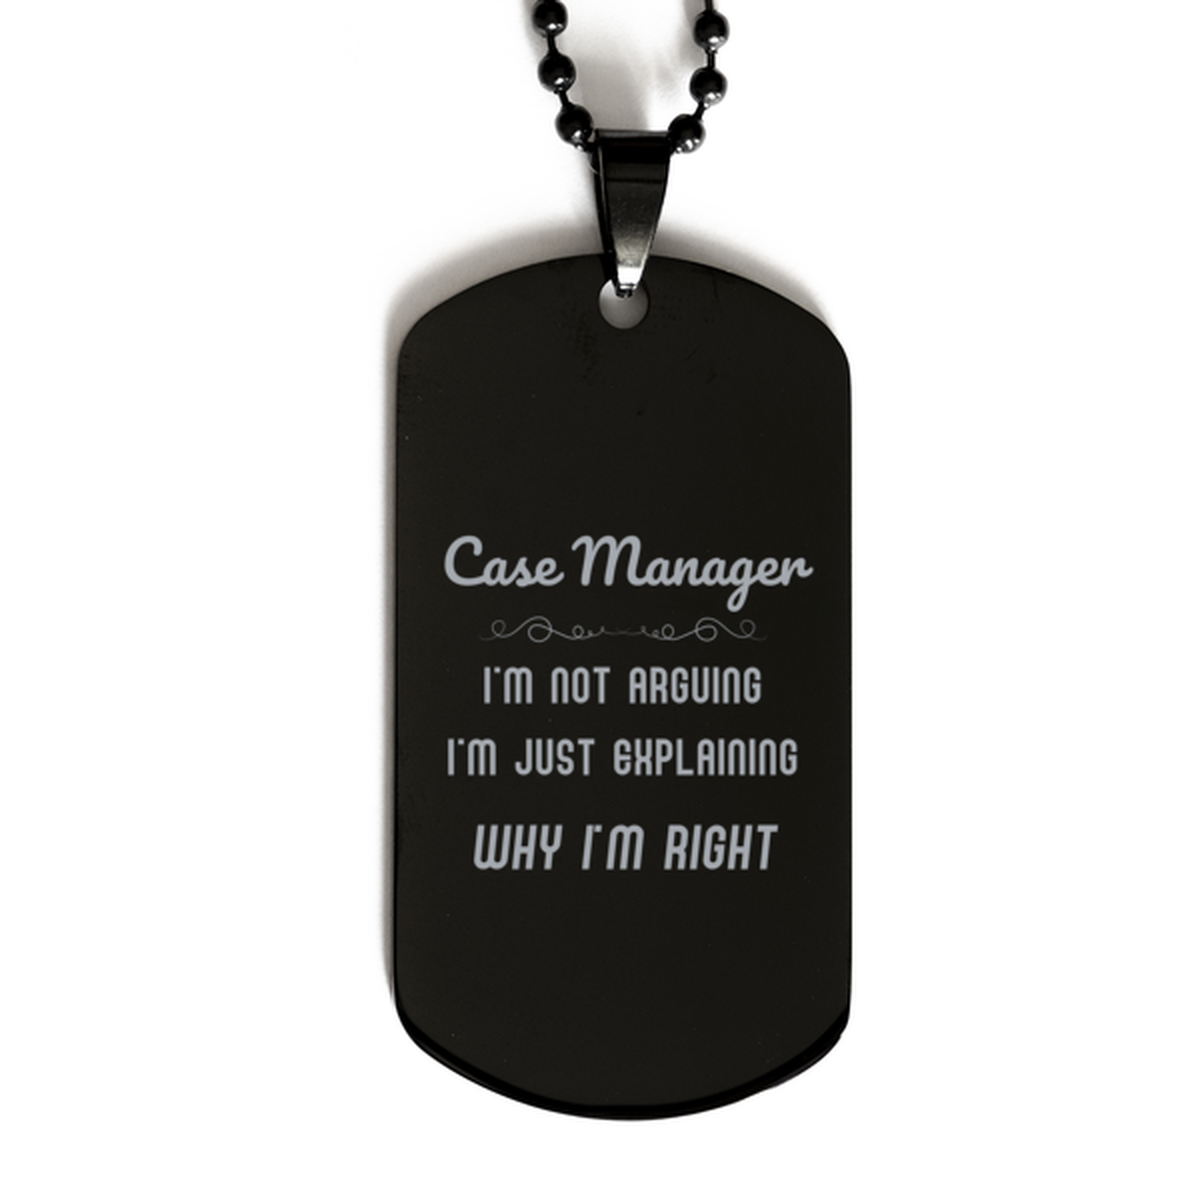 Case Manager I'm not Arguing. I'm Just Explaining Why I'm RIGHT Black Dog Tag, Funny Saying Quote Case Manager Gifts For Case Manager Graduation Birthday Christmas Gifts for Men Women Coworker